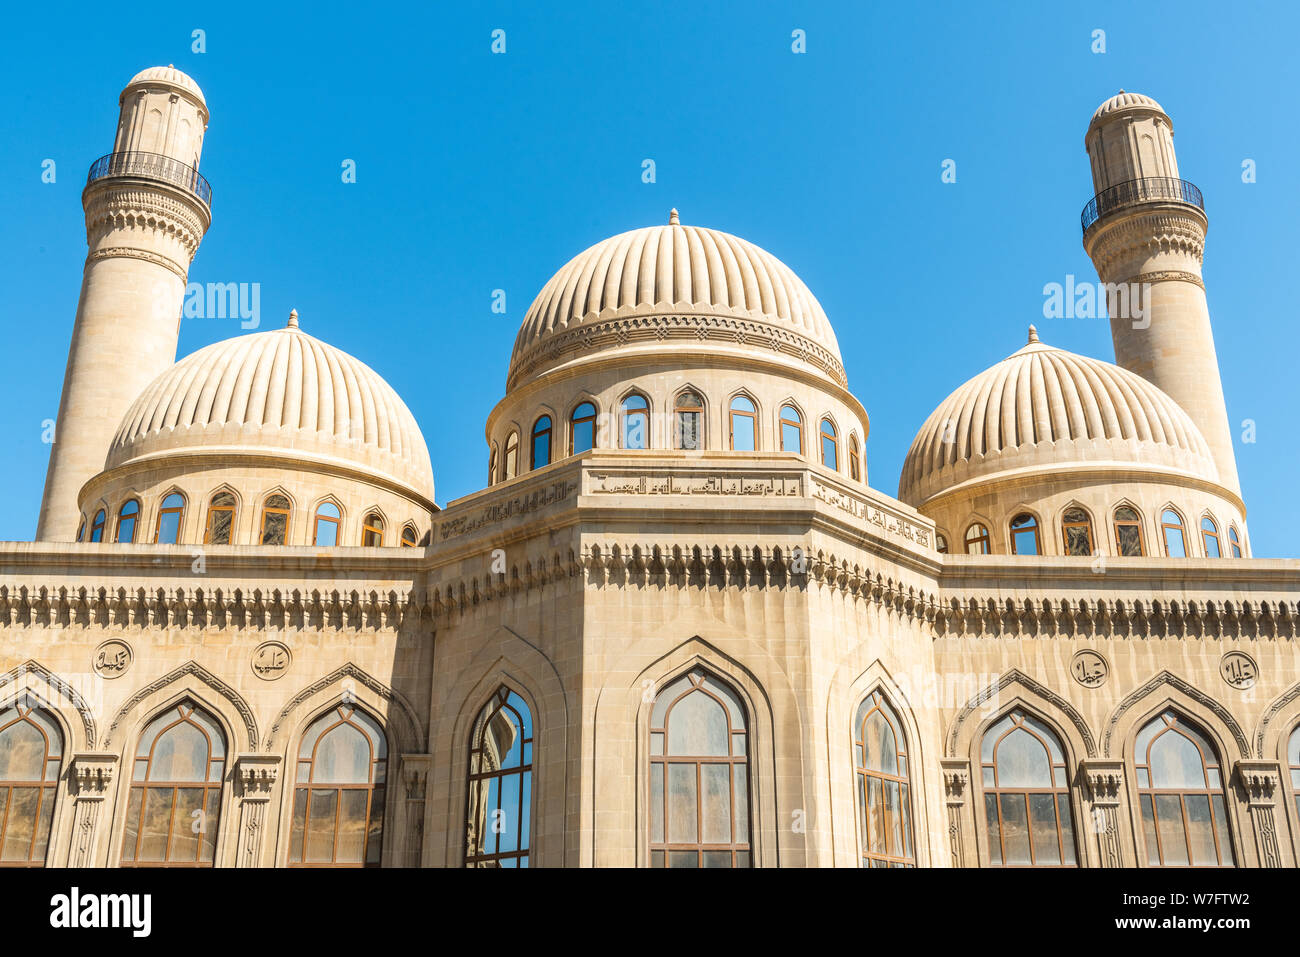 Bibi-Heybat, Baku, Azerbaijan - May 11, 2019.  Minarets and domes of the Bibi-Heybat mosque in Baku. The existing structure, built in the 1990s, is a Stock Photo